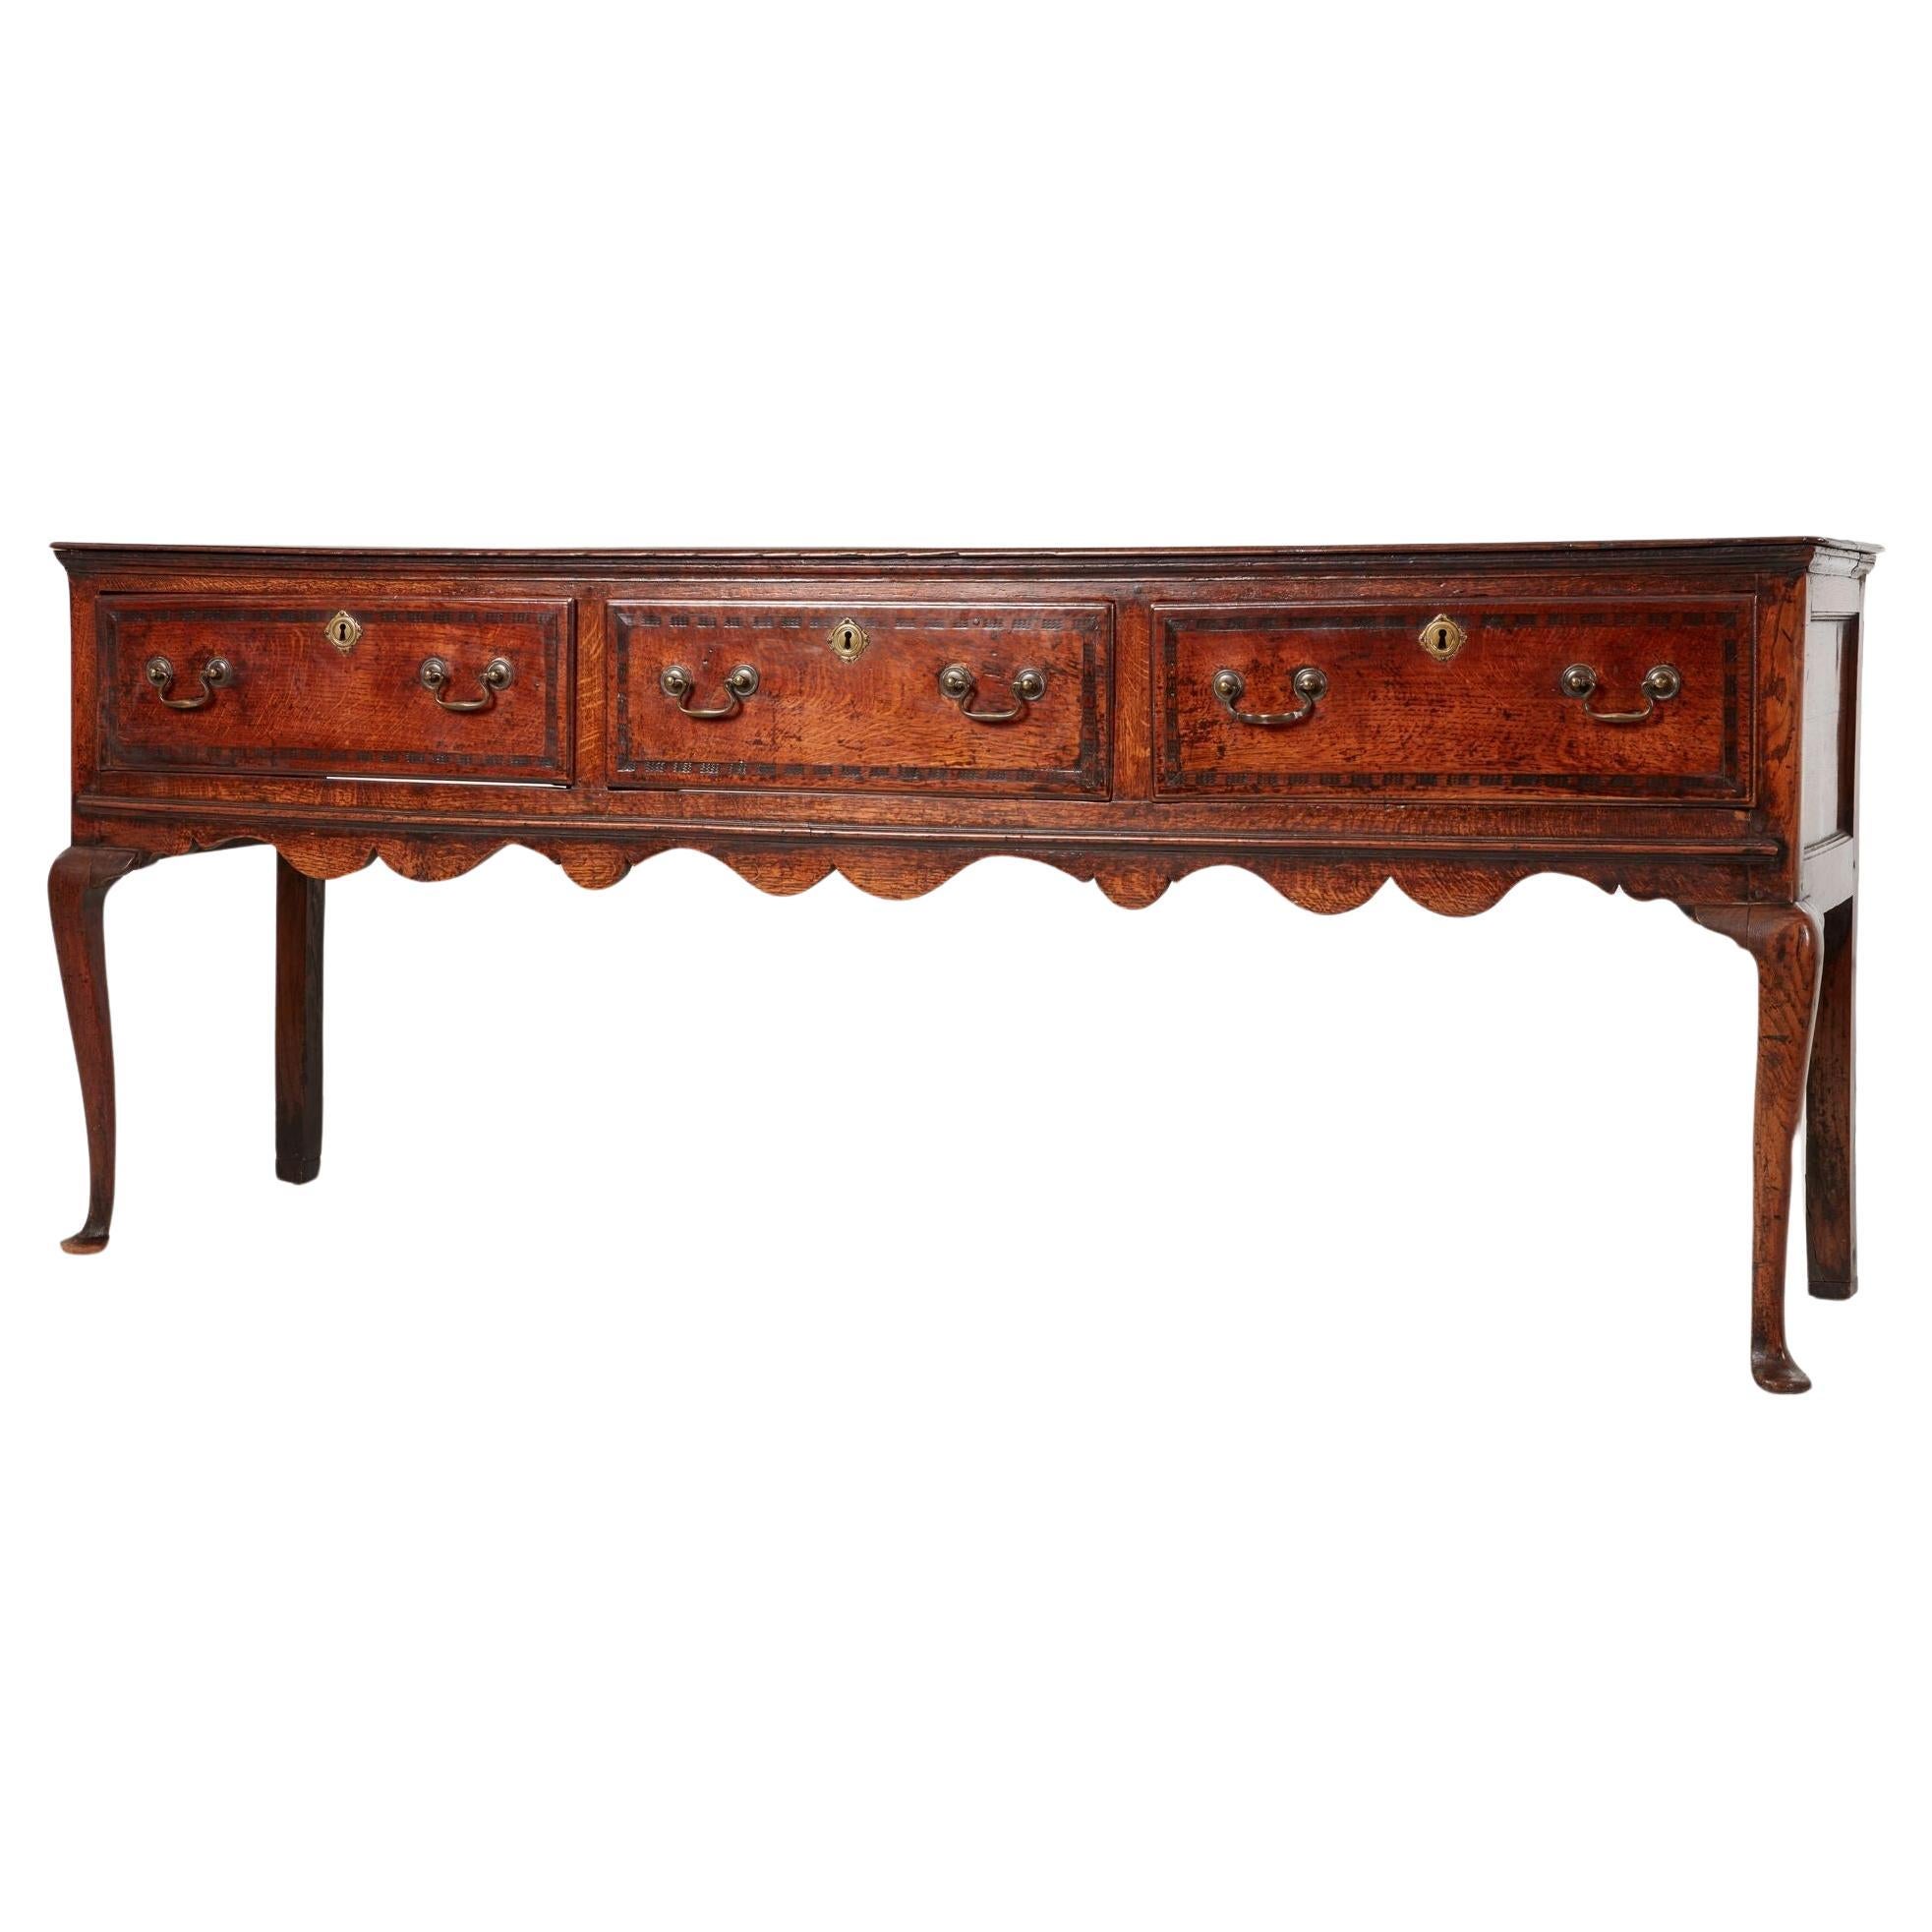 Scalloped 18th c. Welsh Sideboard